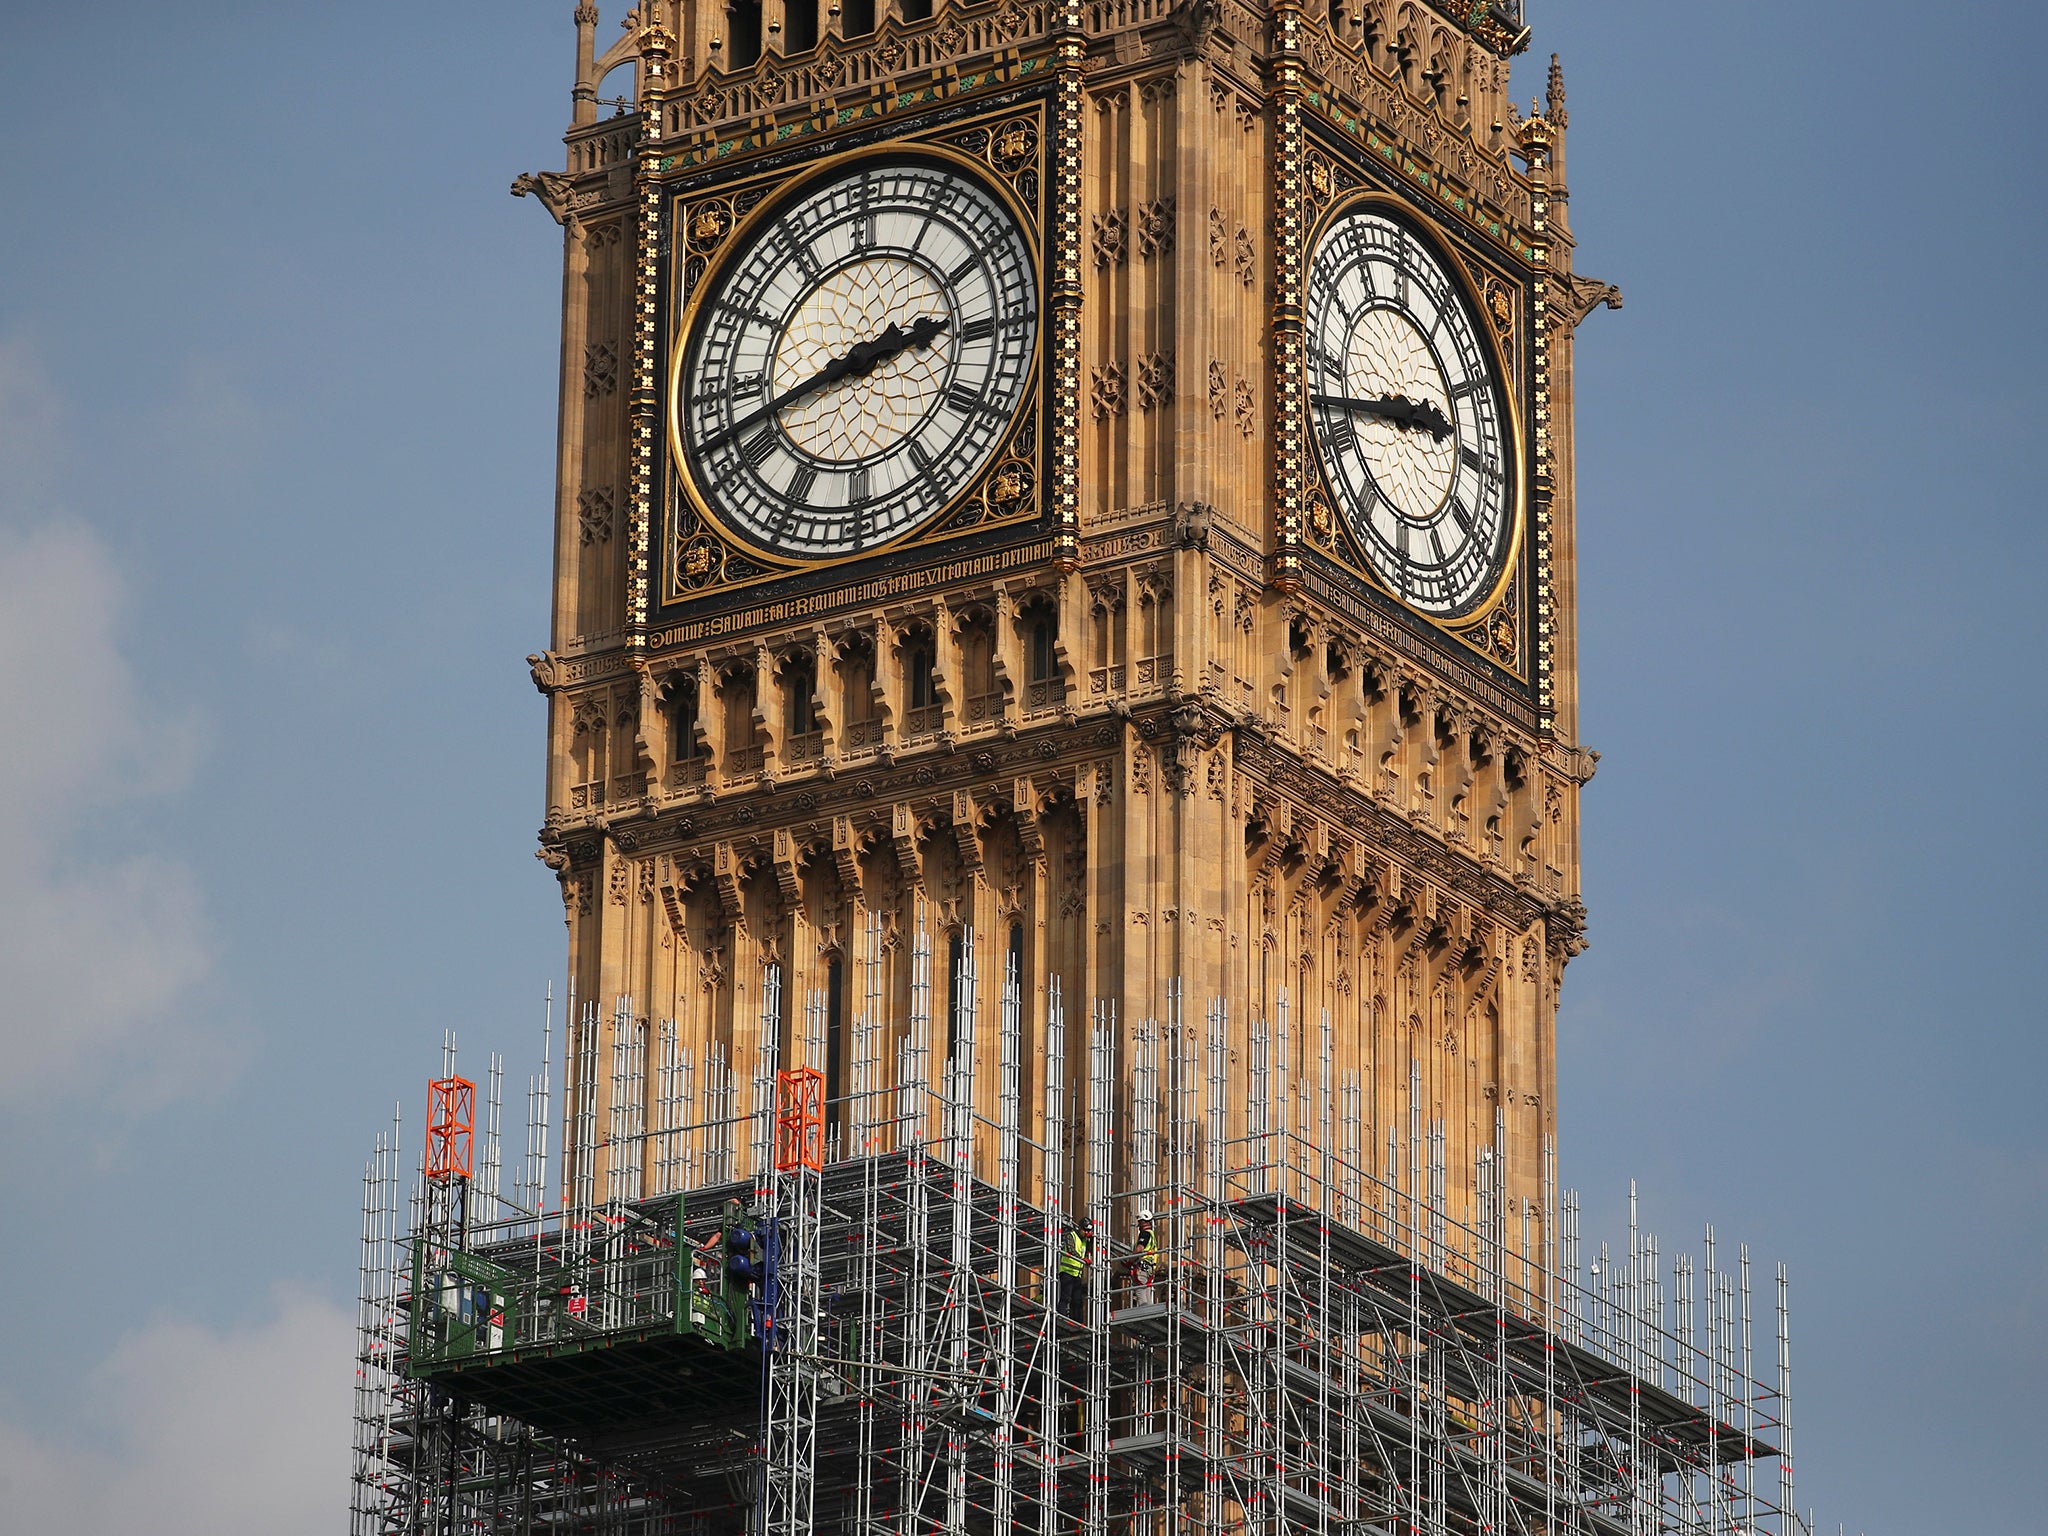 Cost Of Renovating Big Ben Doubles To 61m The Independent The Independent